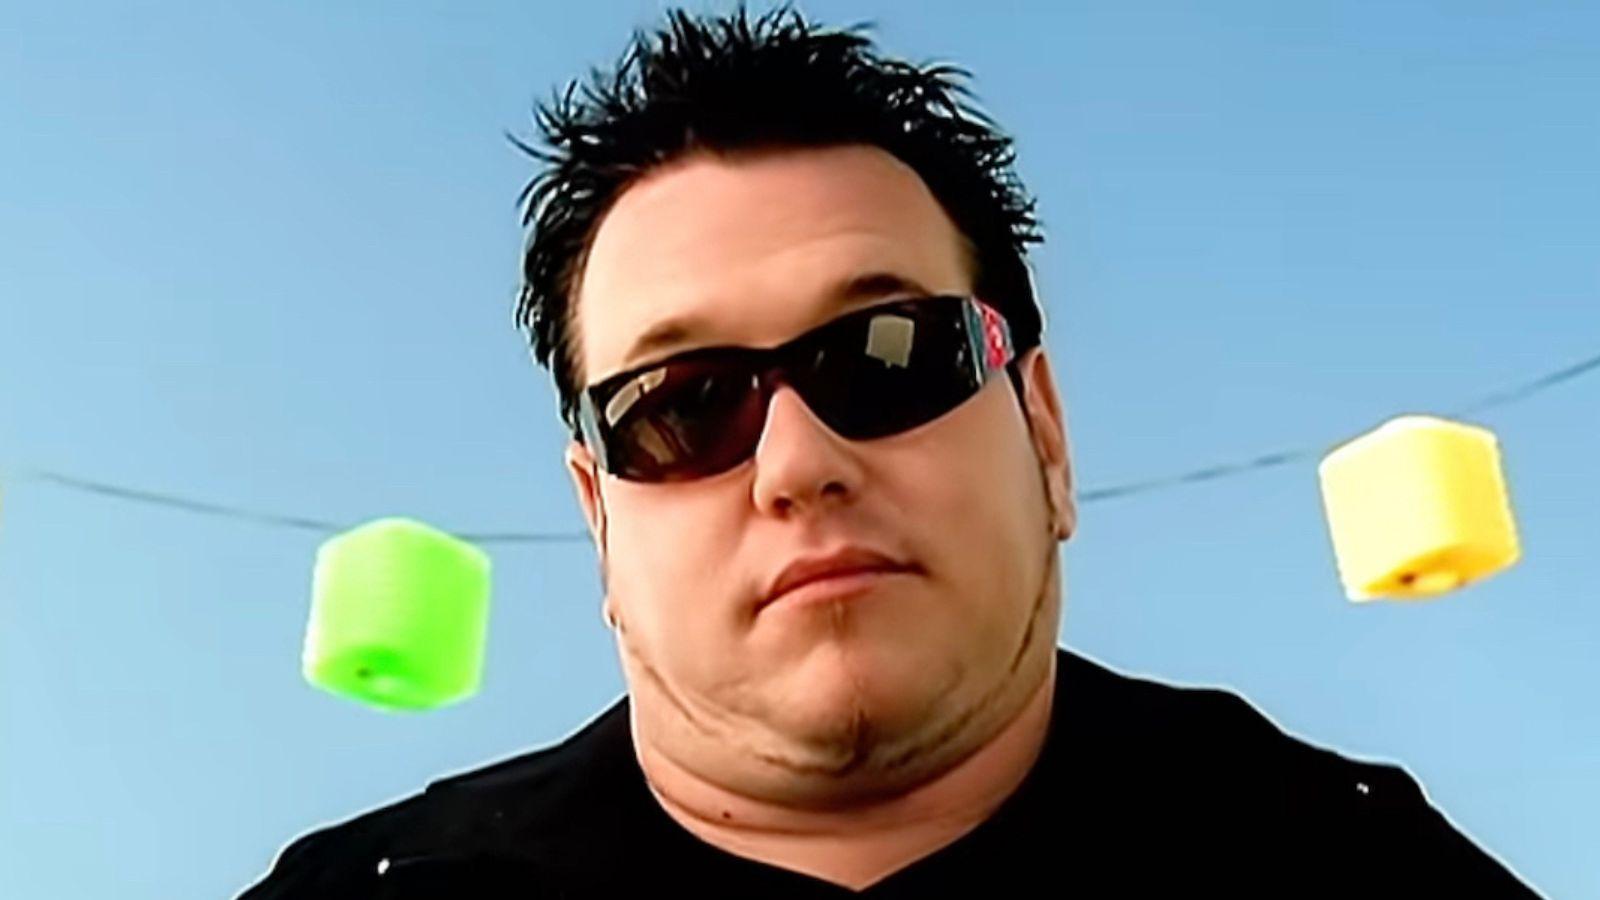 Smash Mouth singer Steve Harwell dead at 56 years old - Dexerto